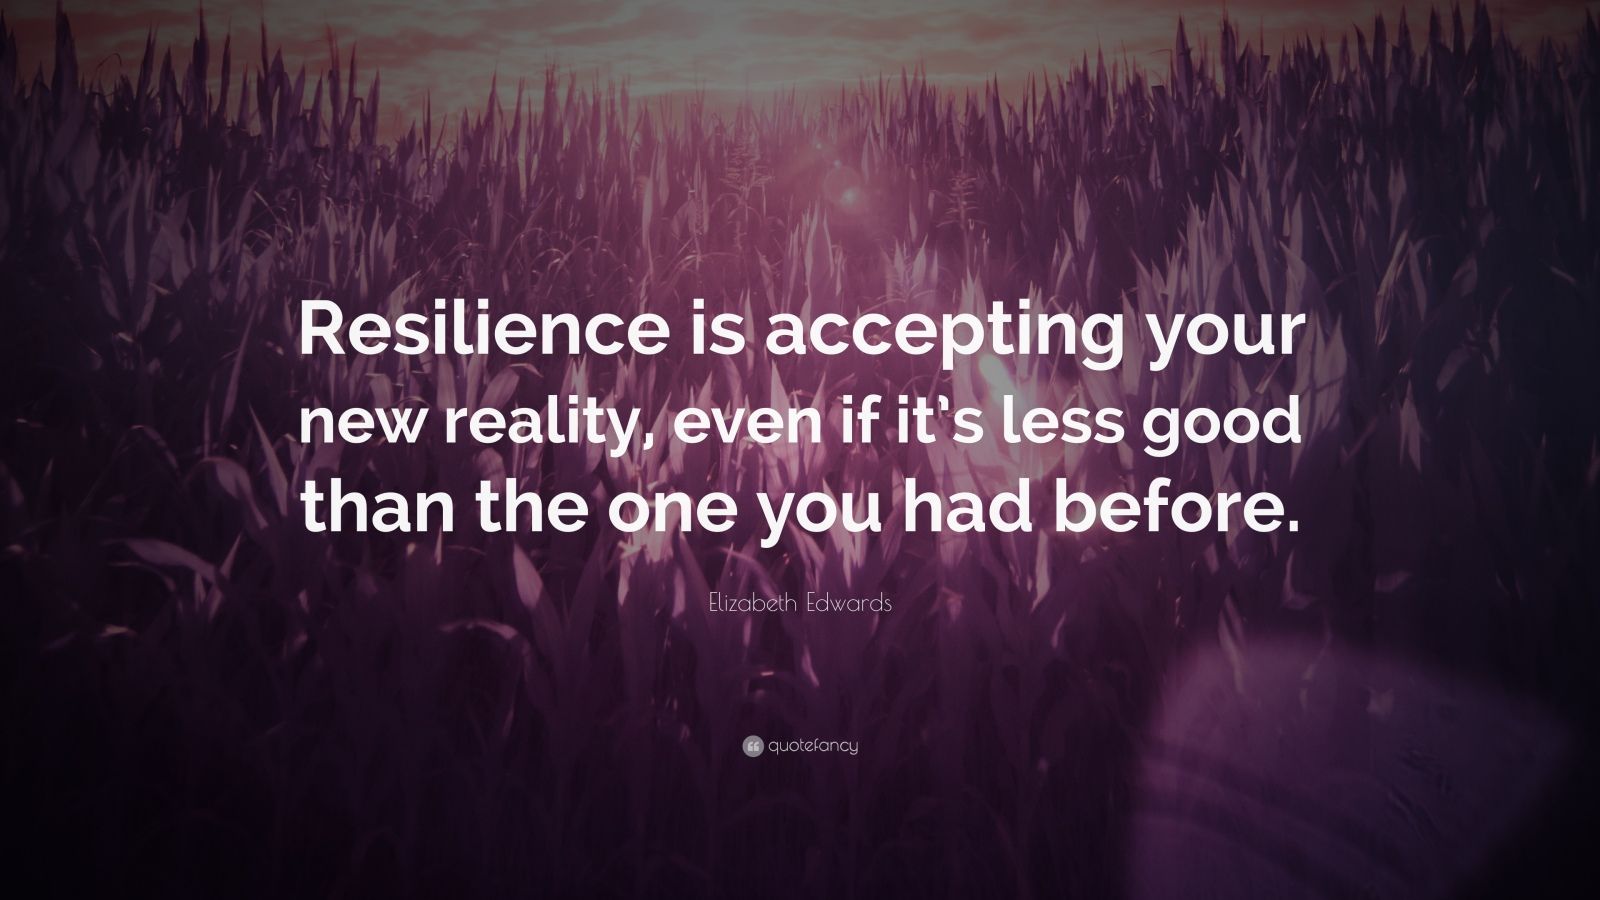 Elizabeth Edwards Quote: “Resilience is accepting your new reality ...